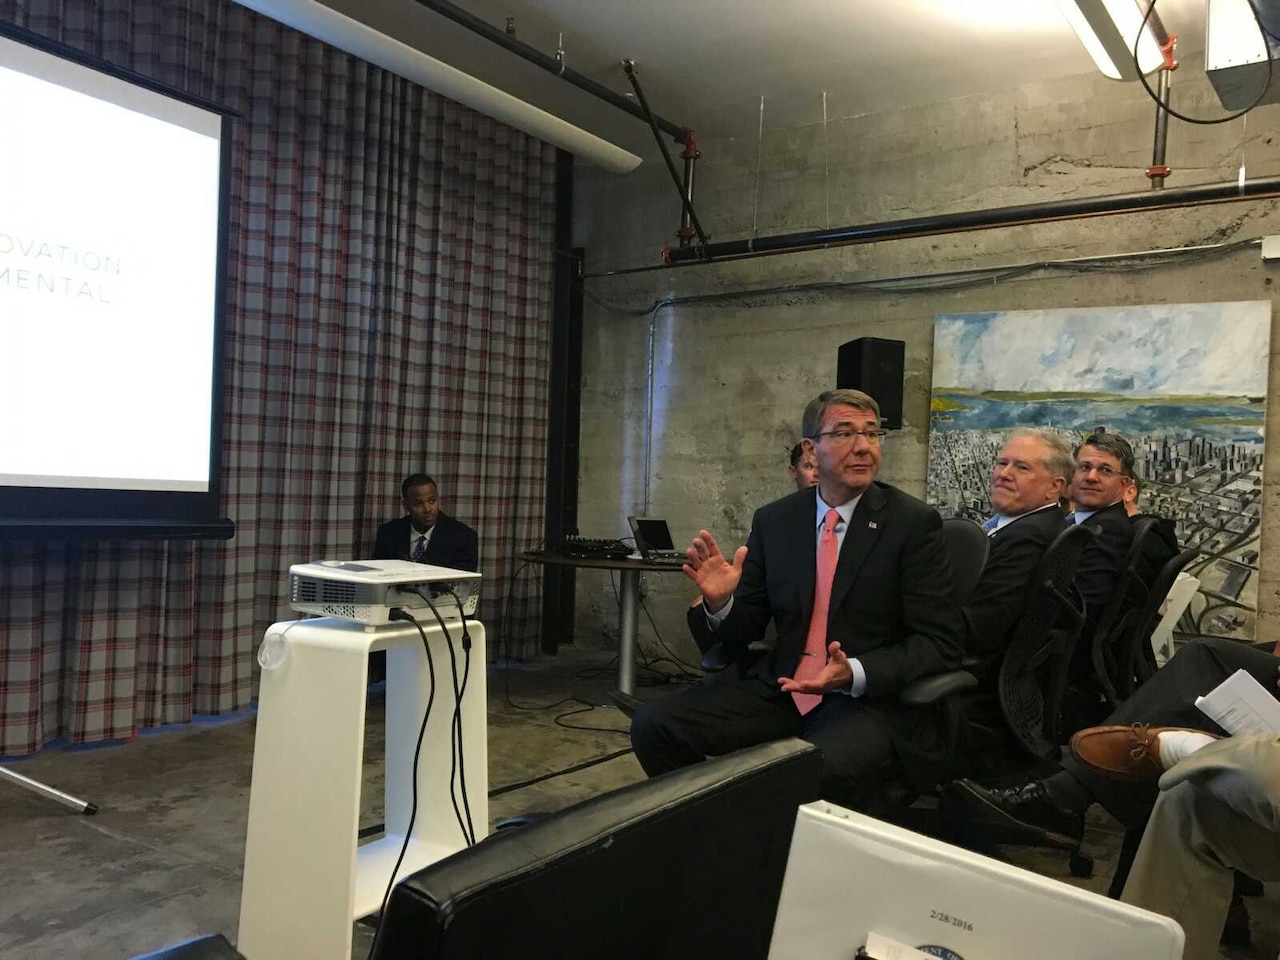 A representative from venture-capital-backed startup Bromium gives Defense Secretary Ash Carter and other DoD leaders a technology overview during their visit to Silicon Valley, March 1, 2016. The company, based in Cupertino, Calif., works with virtualization technology, focusing on virtual hardware to eliminate everyday computer threats such as viruses, malware and adware. DoD photo